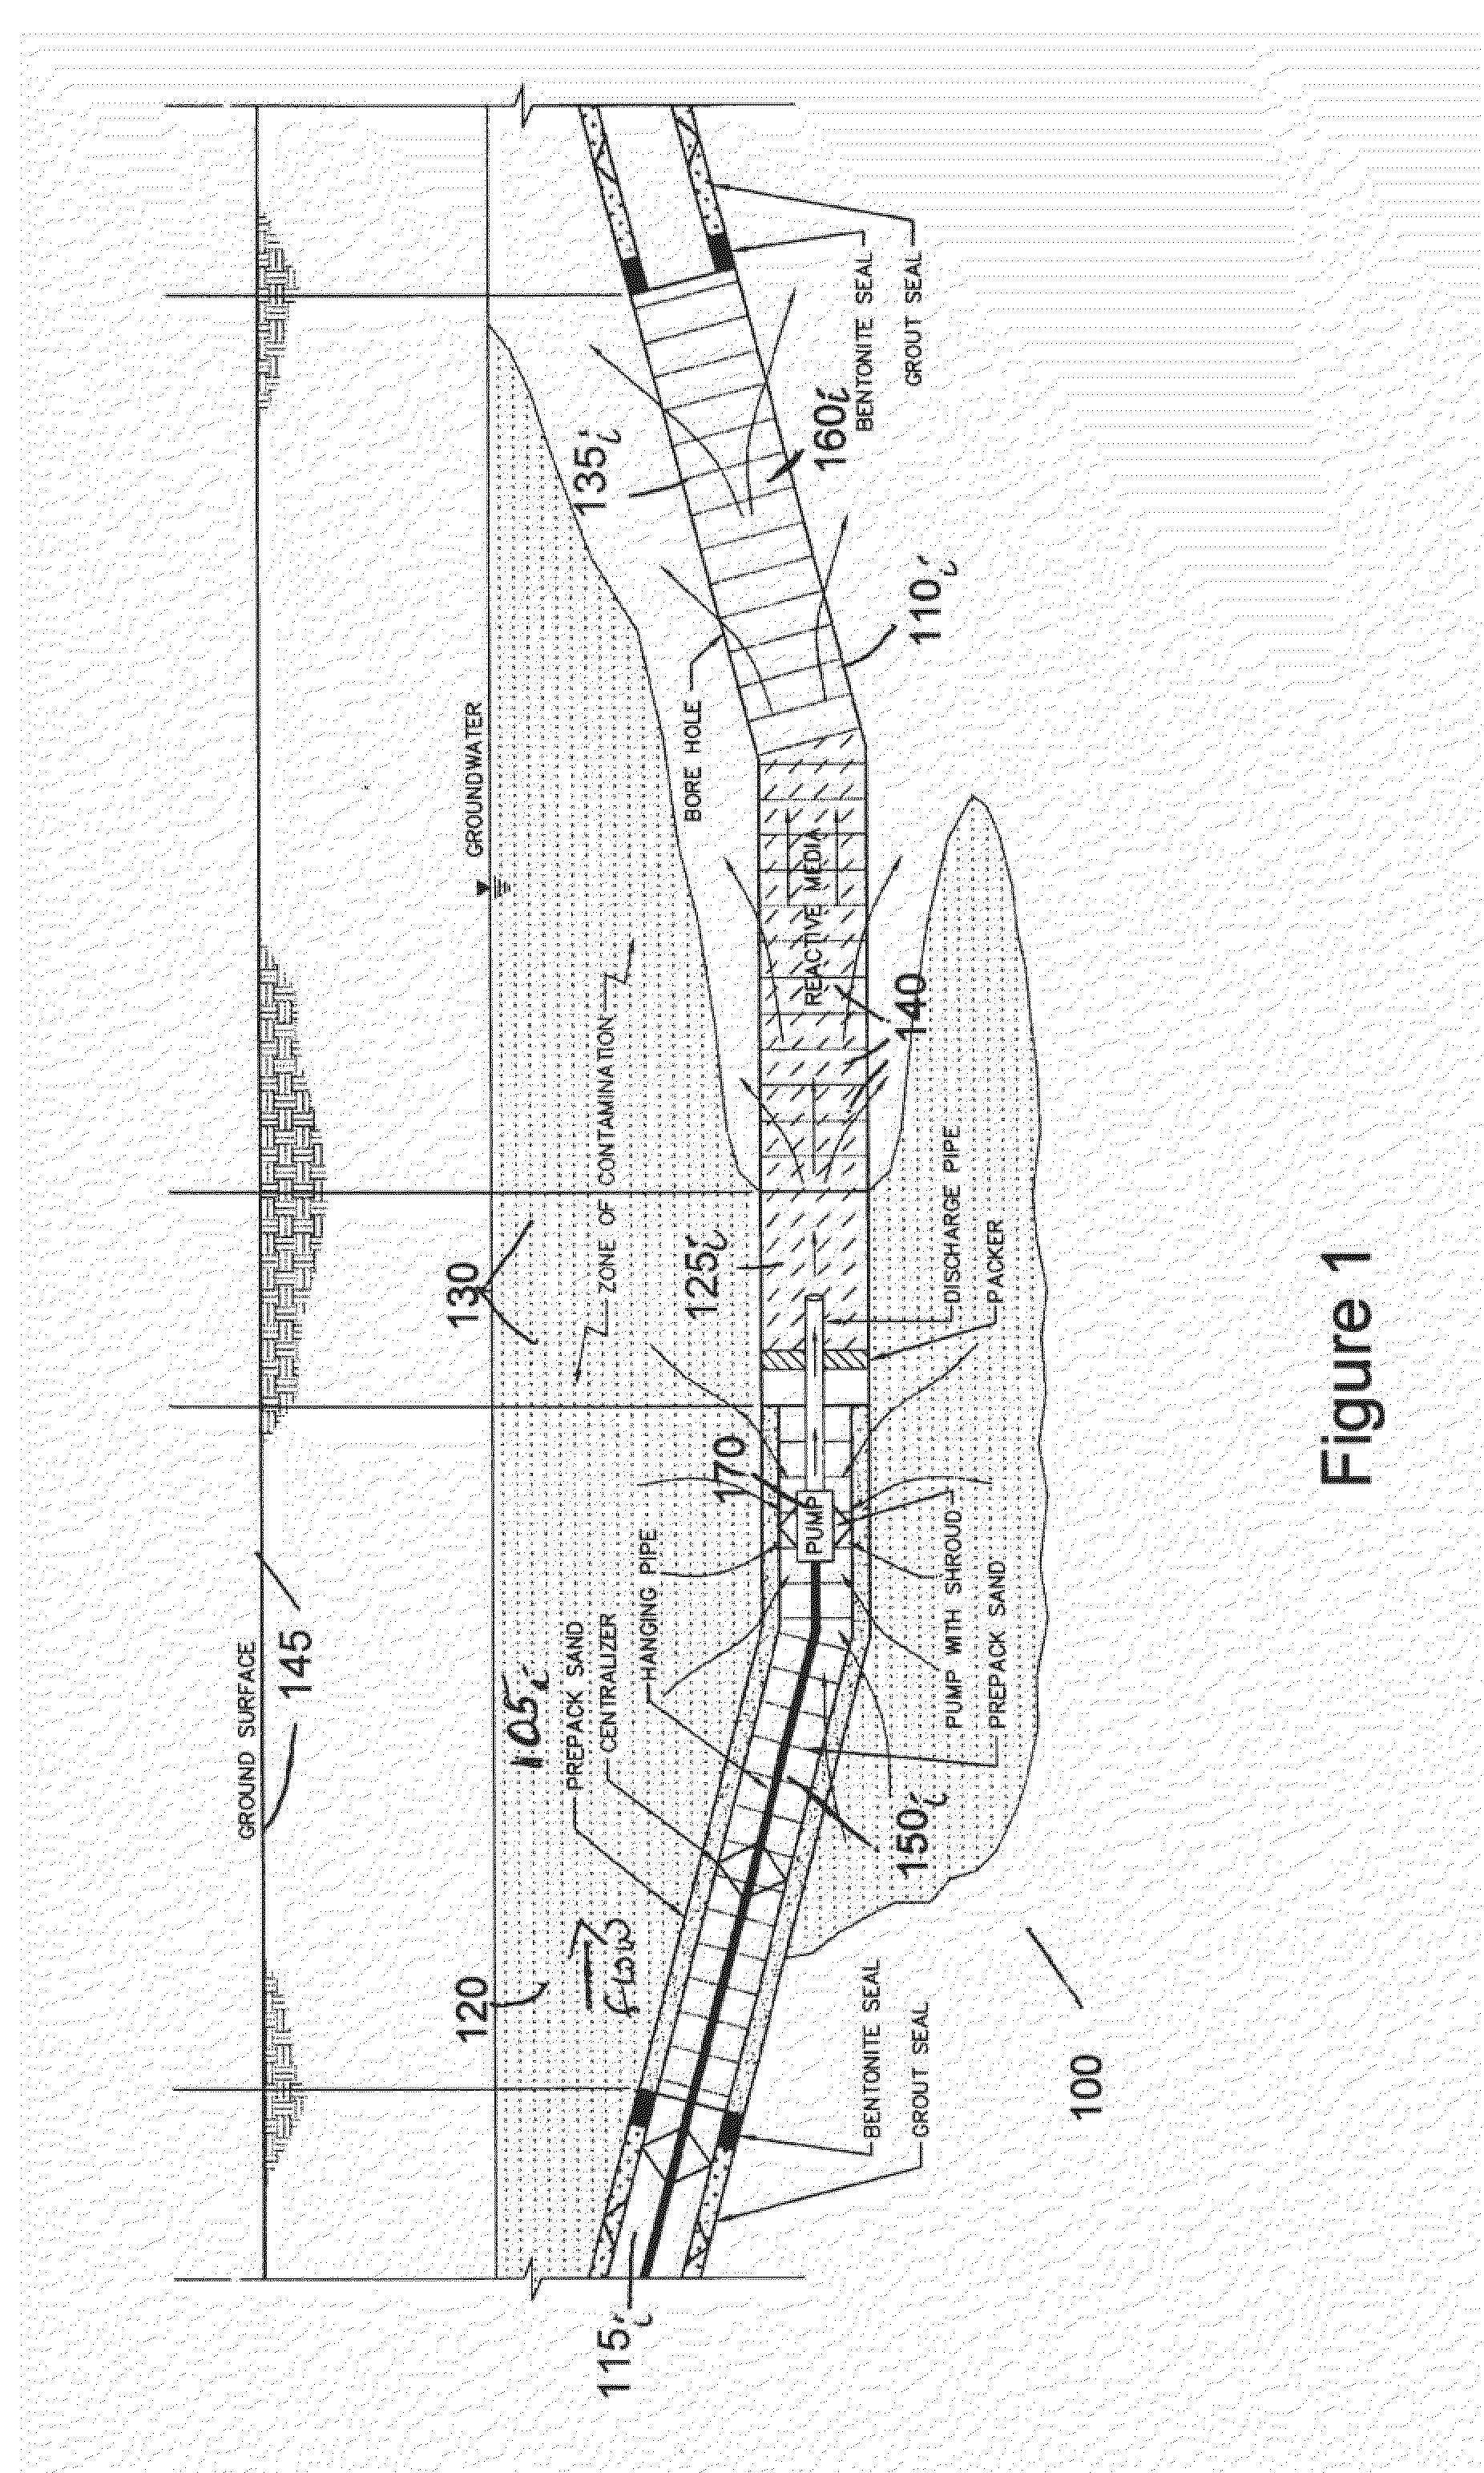 Horizontal In-Well Treatment System and Source Area Bypass System and Method For Groundwater Remediation